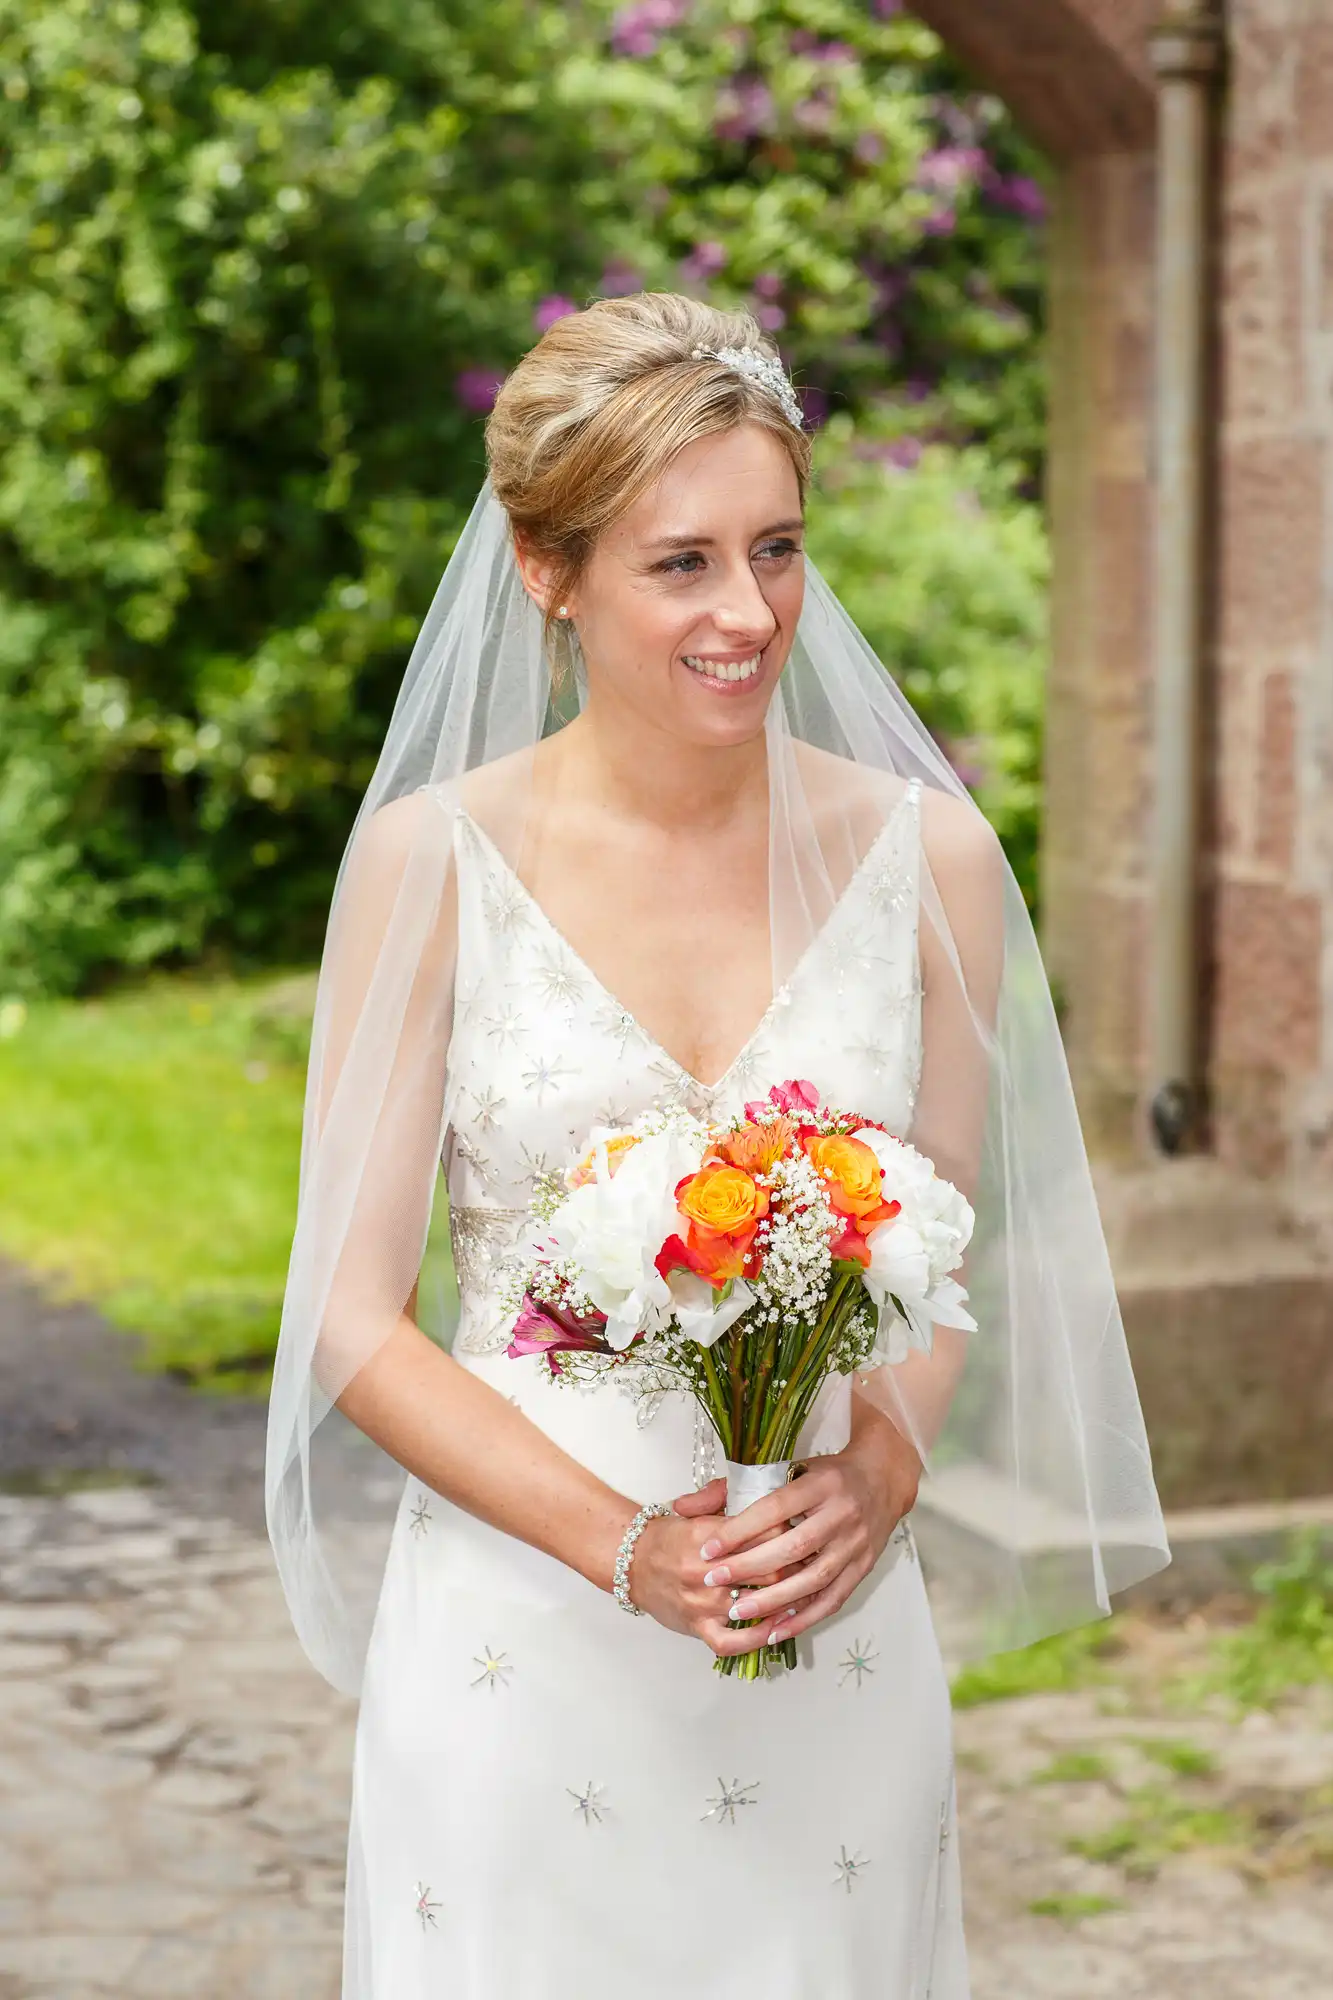 A bride in a white dress with a veil holding a bouquet of white and orange flowers, smiling outdoors with greenery in the background.